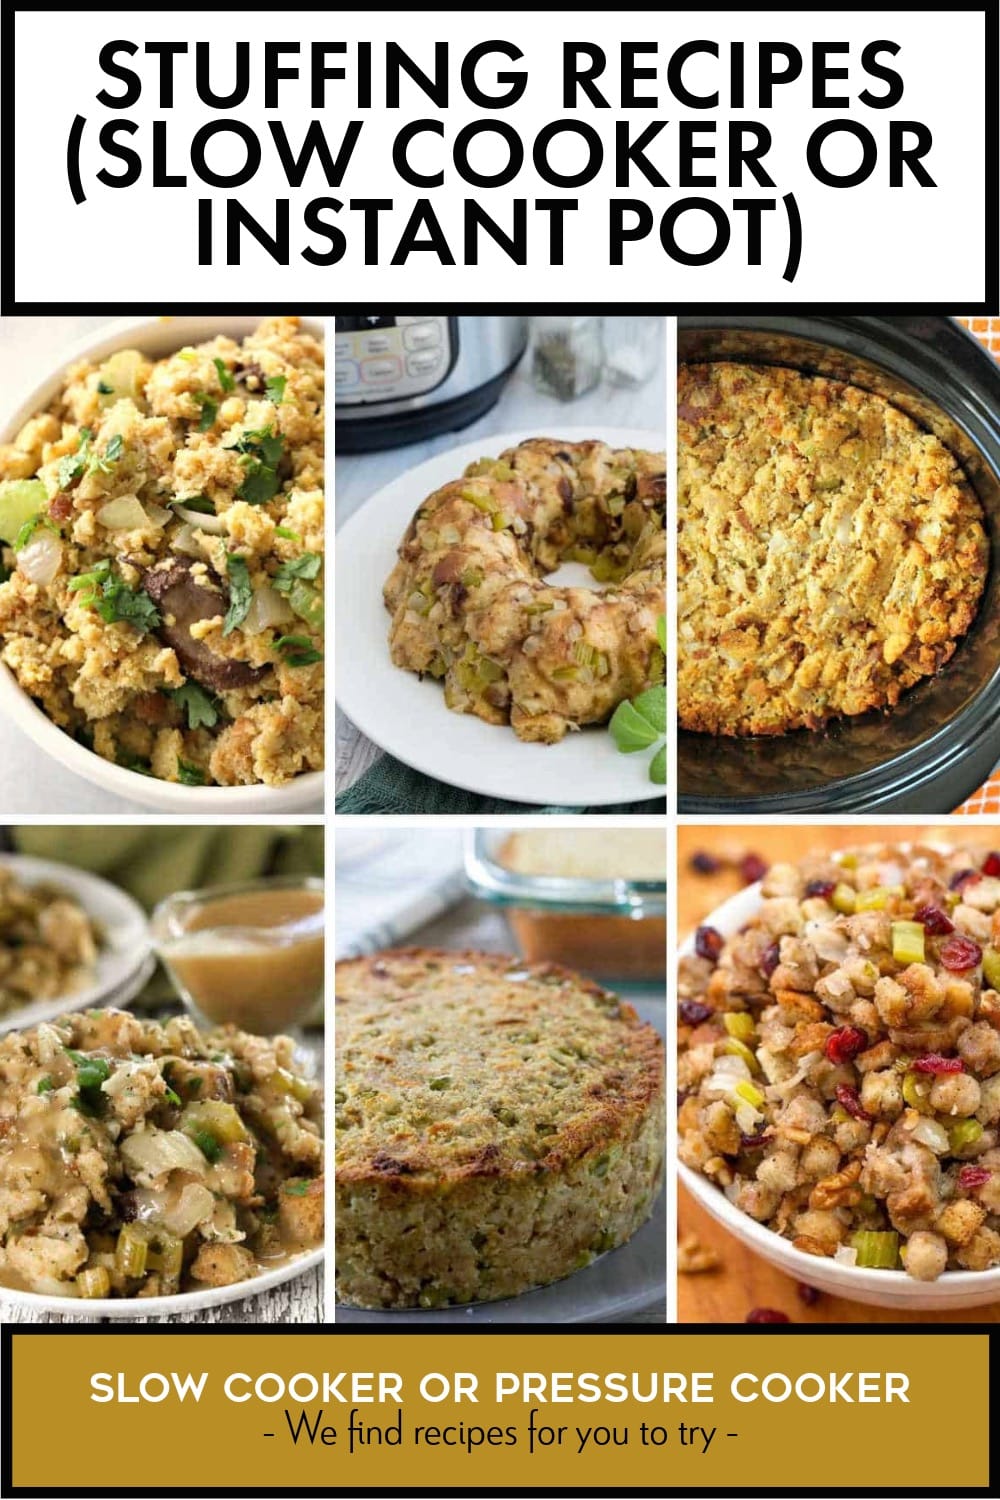 Pinterest image of Stuffing Recipes (Slow Cooker or Instant Pot)